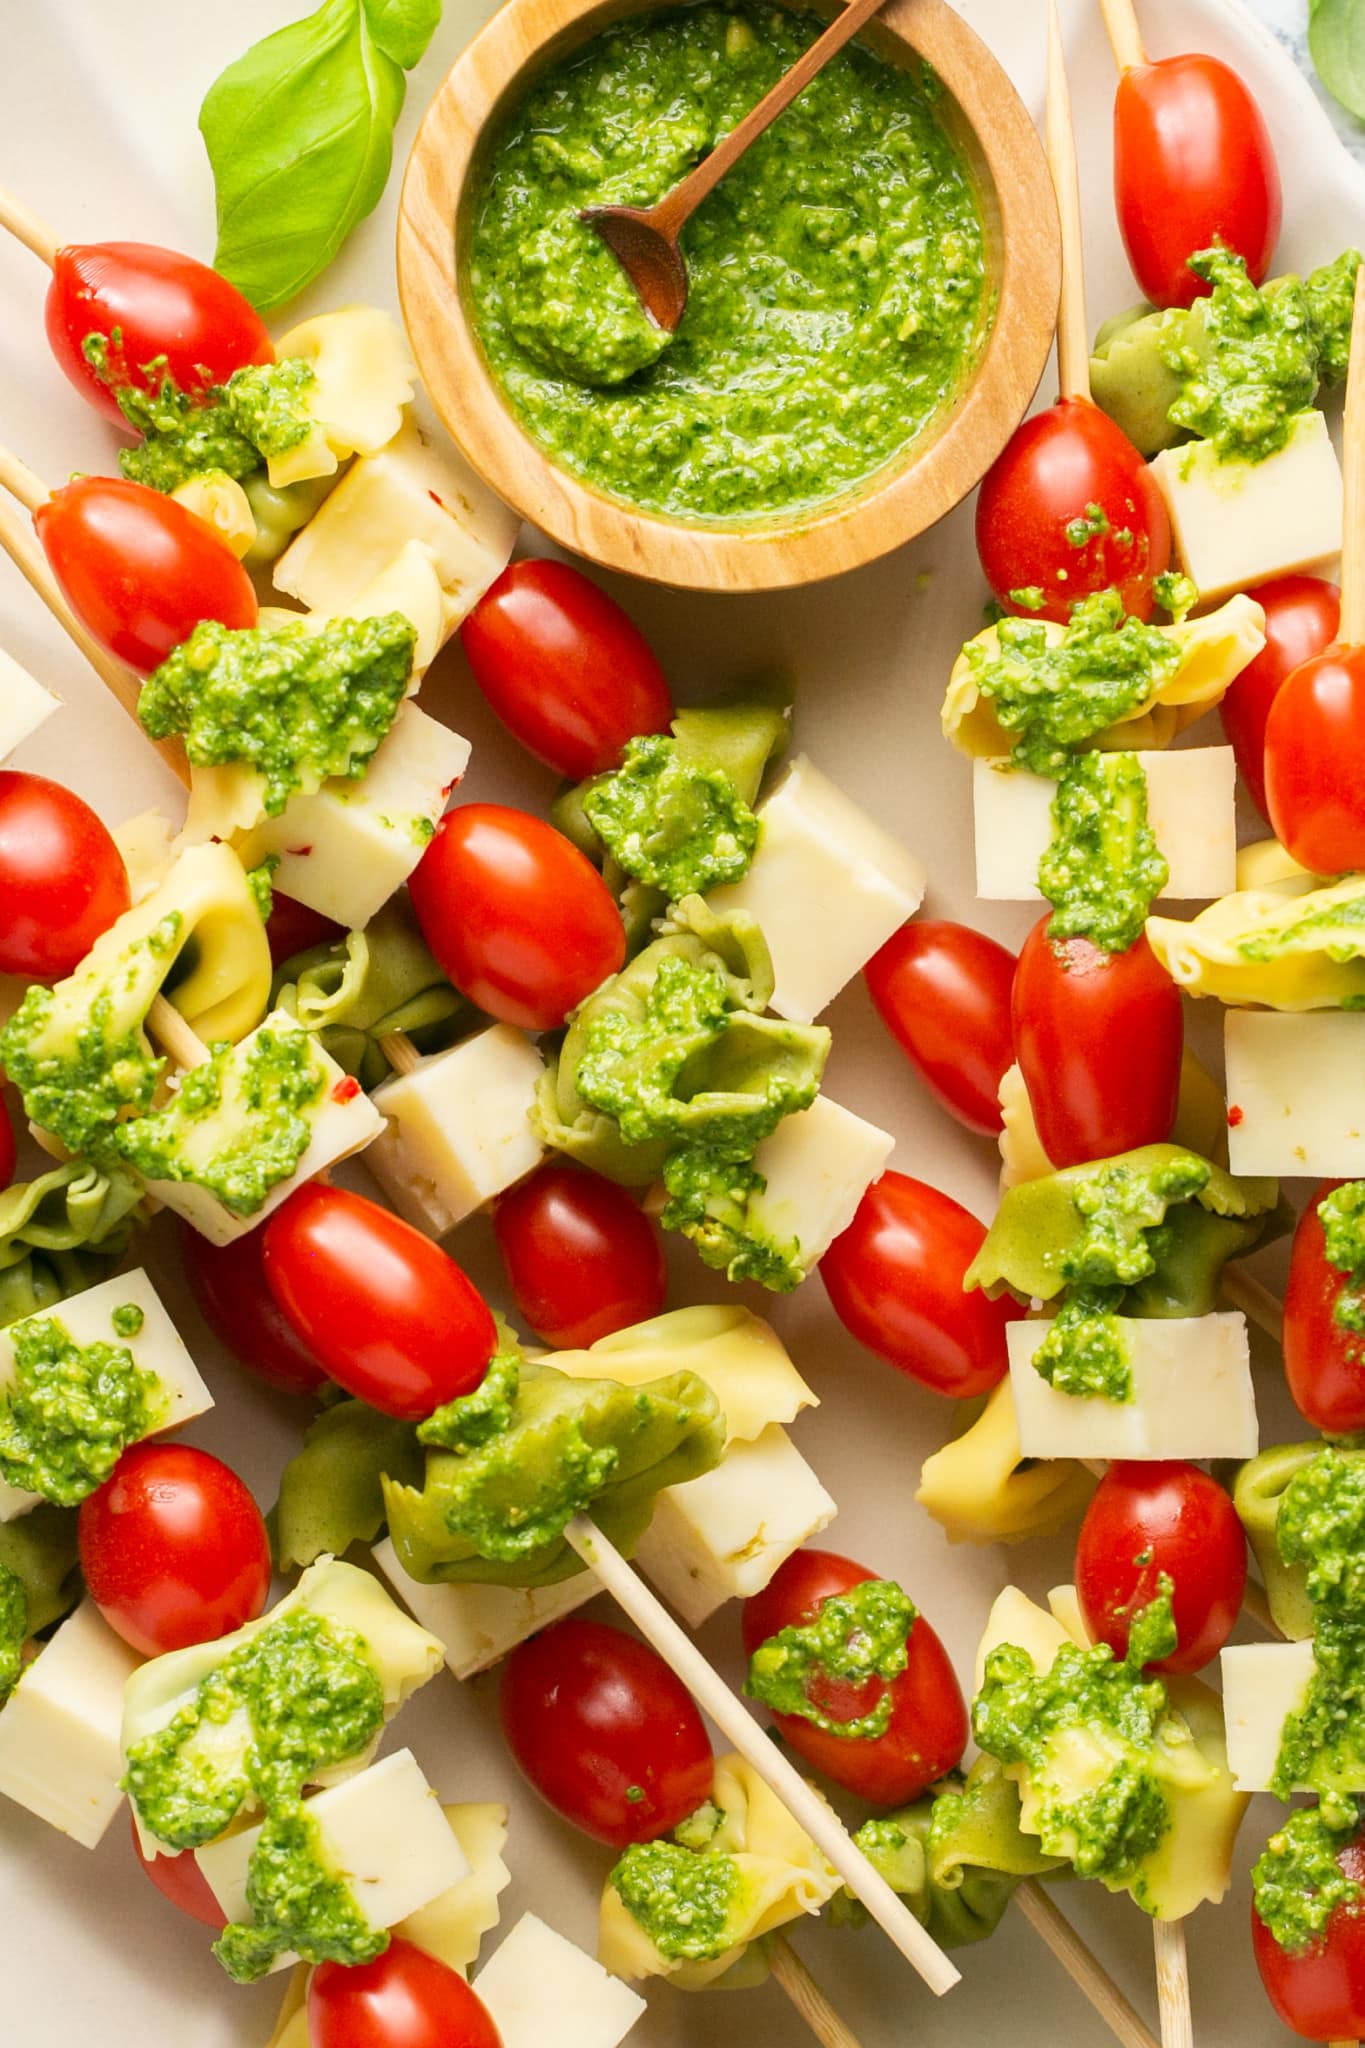 These Tortellini Skewers are made with cheese tortellini, cherry tomatoes, pepper jack cheese and served with a lemon spinach pesto for dipping. They are an easy party appetizer and are always a hit! #tortellini #partyappetizer #appetizerideas #easyappetizers #krollskorner #bbqsides #bbqideas #partysnacks 